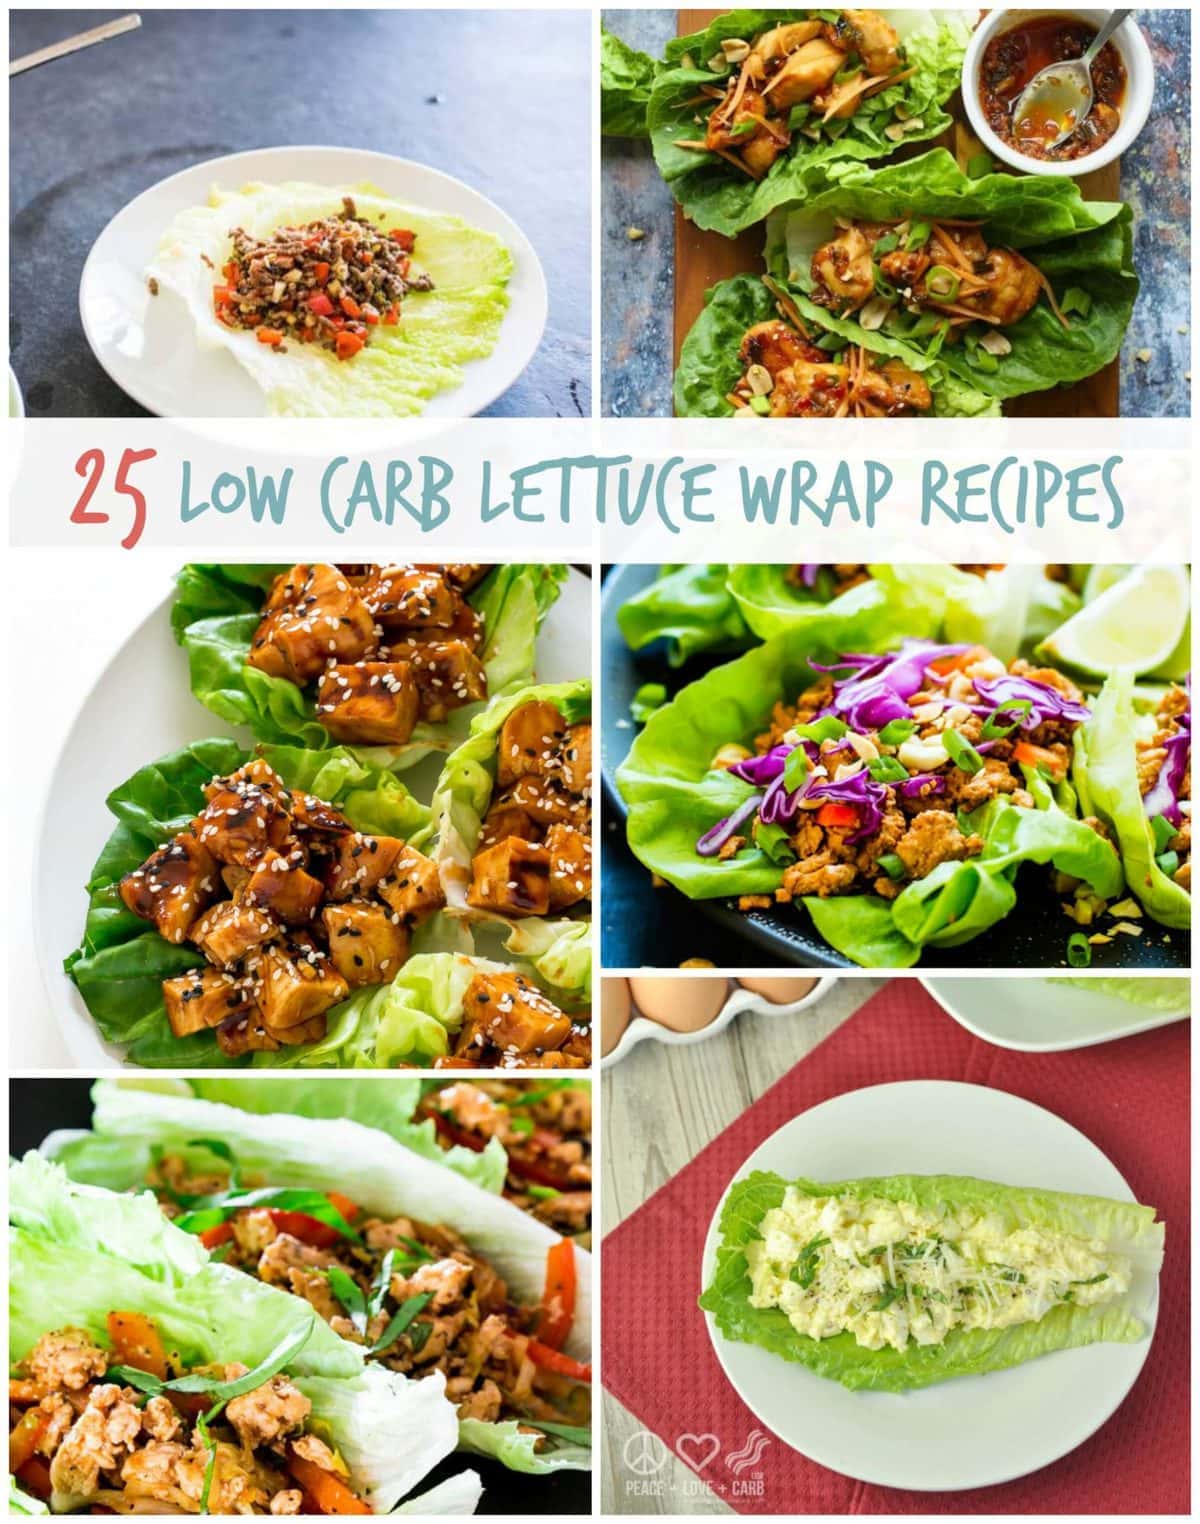 25 Low Carb Lettuce Wrap Recipes | Peace Love and Low Carb